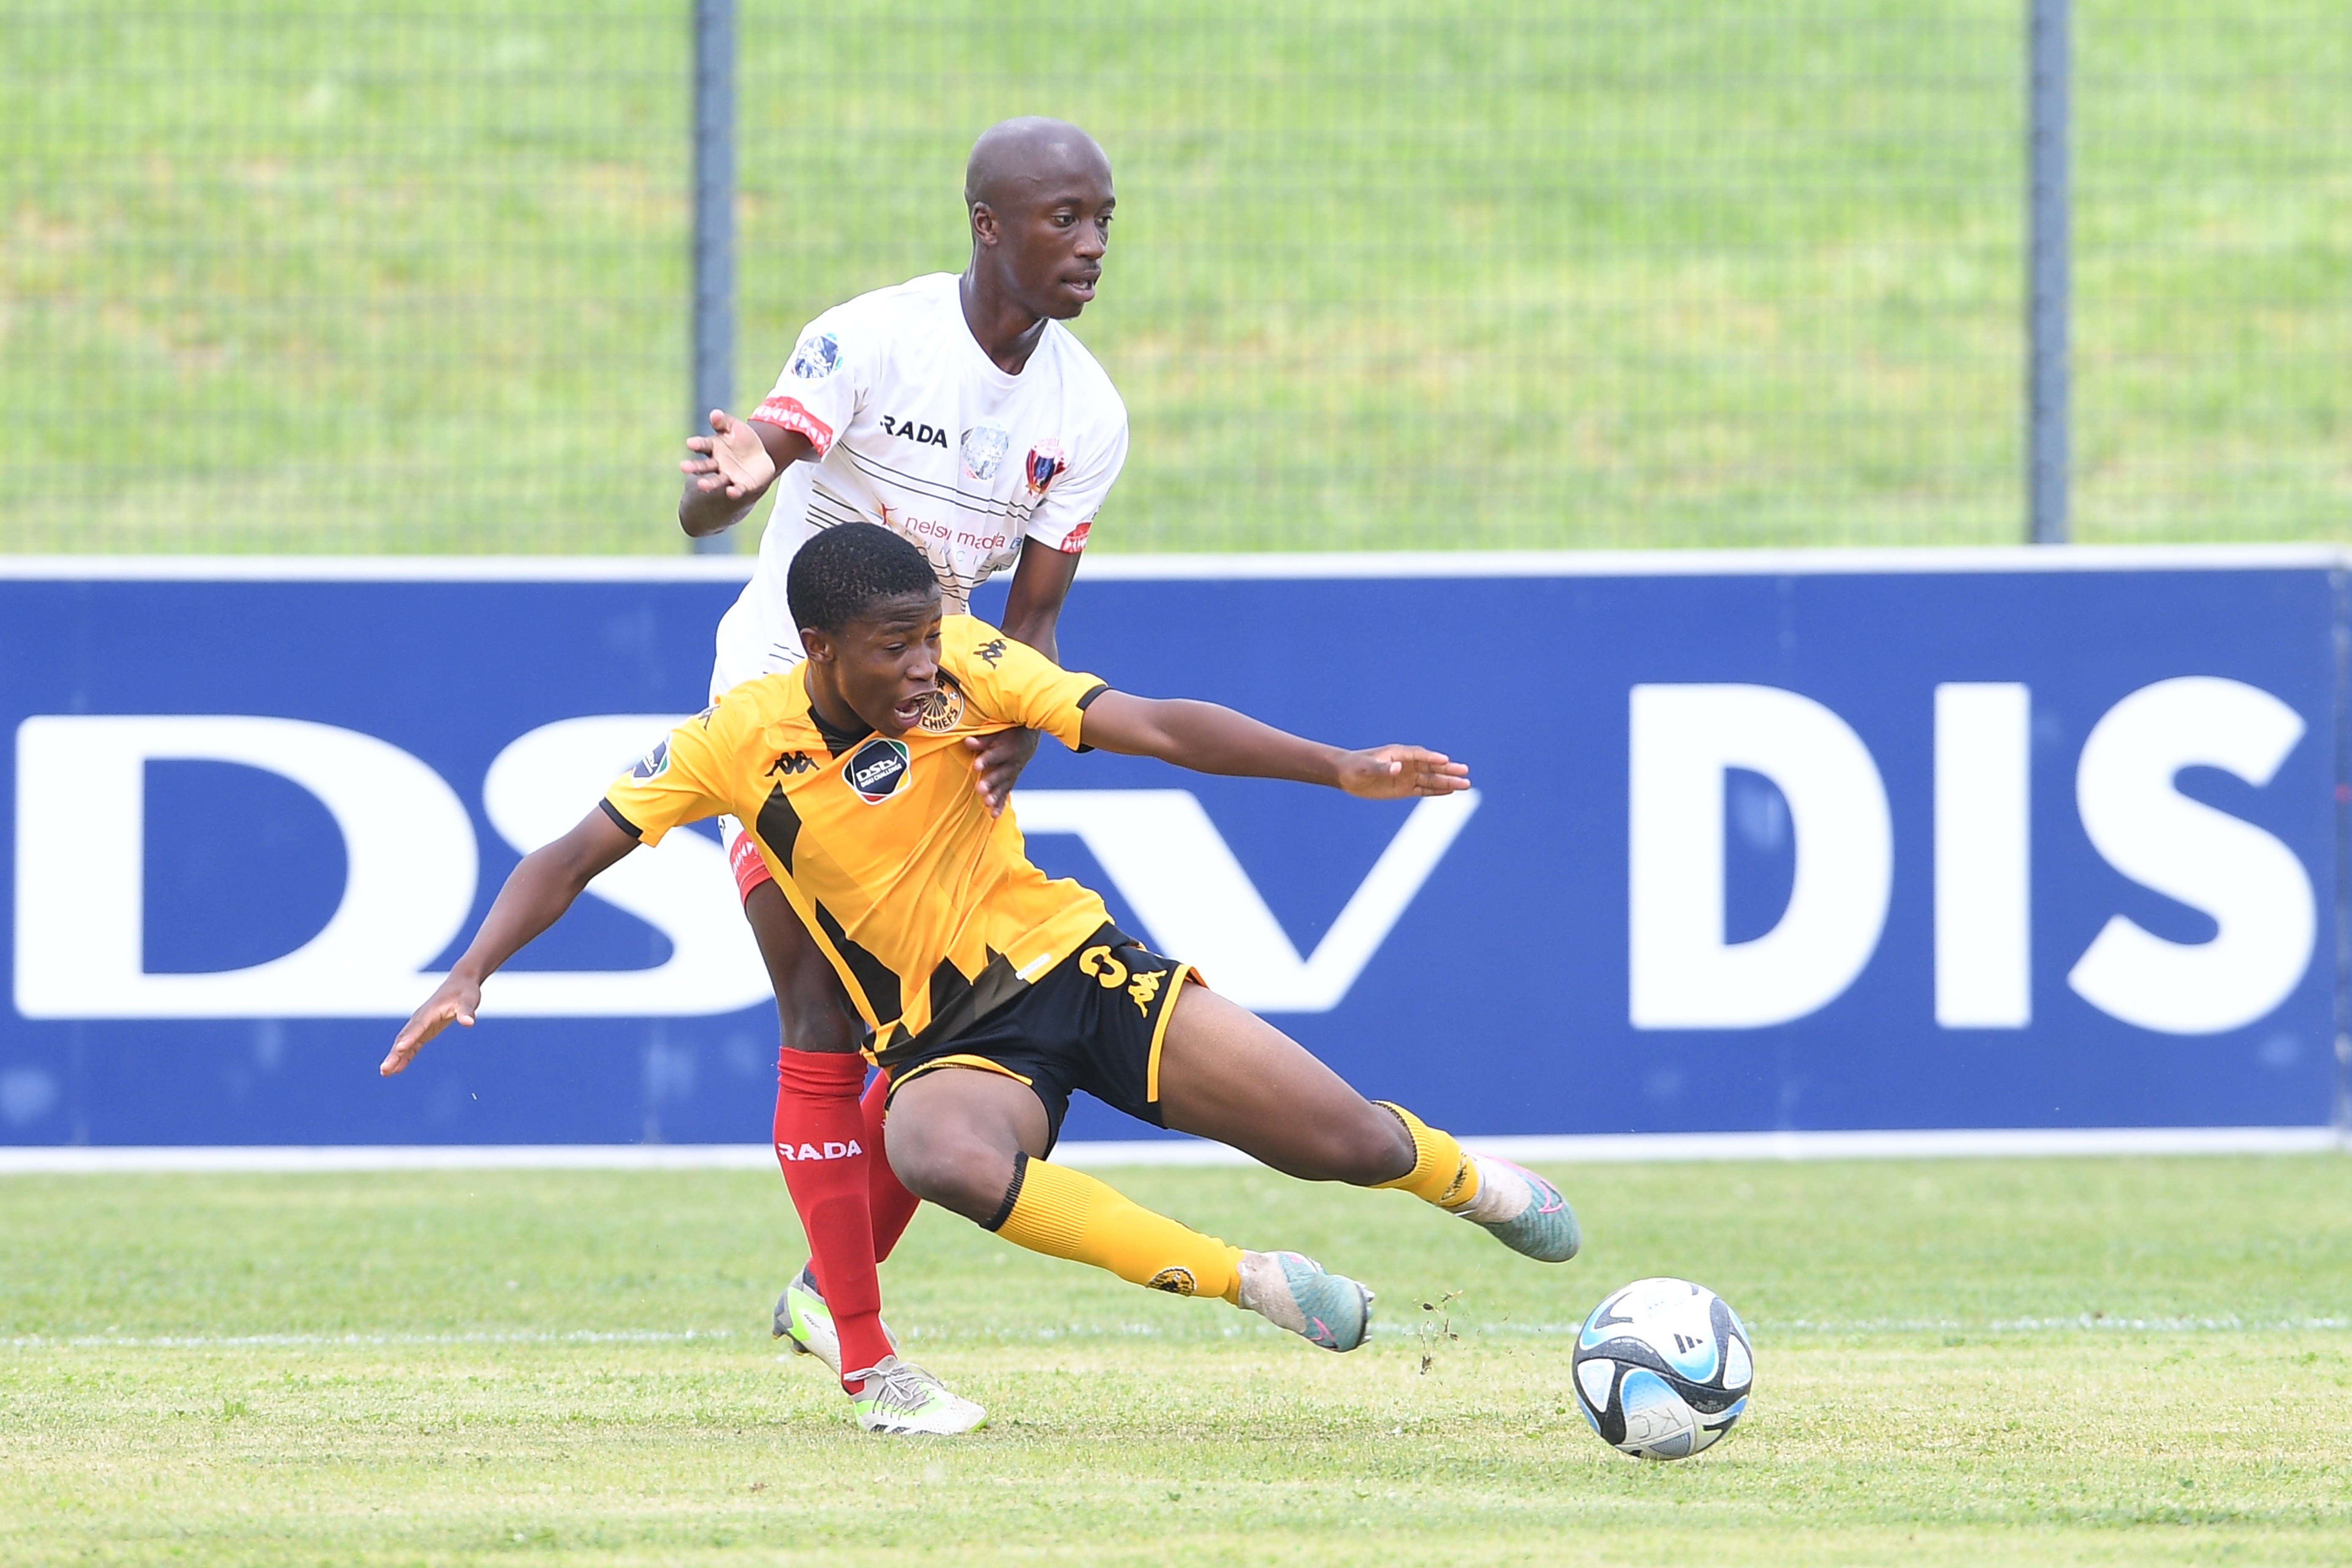 Neo Bohloko Roc Nation Eye Kaizer Chiefs Youngster